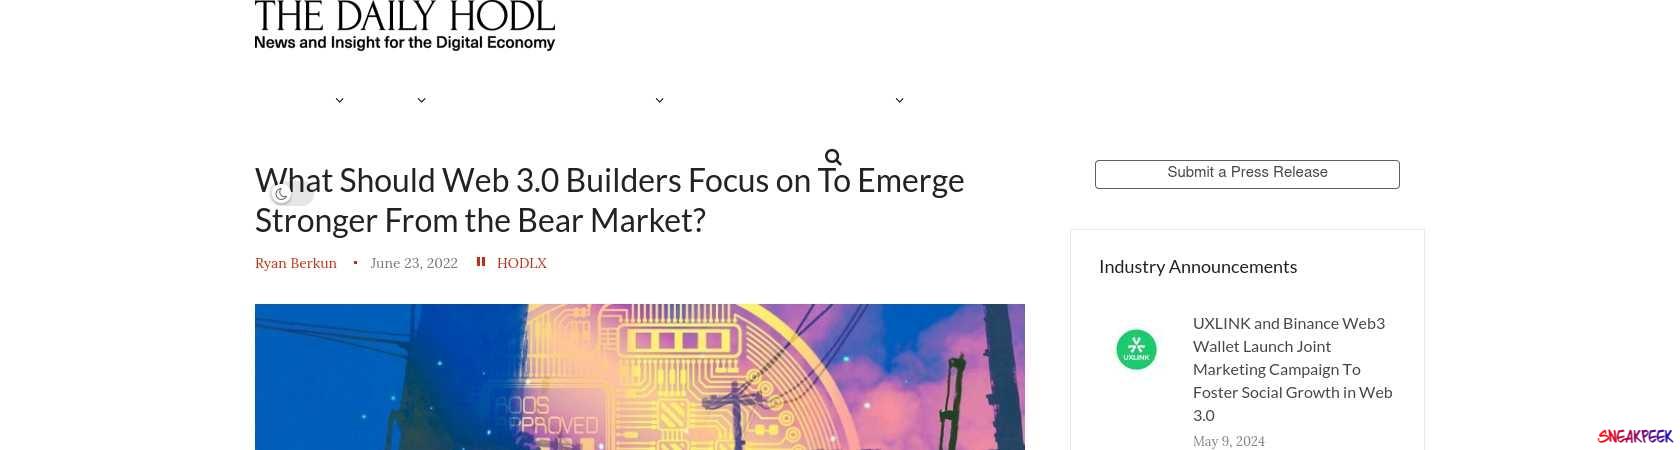 Read the full Article:  ⭲ What Should Web 3.0 Builders Focus on To Emerge Stronger From the Bear Market?